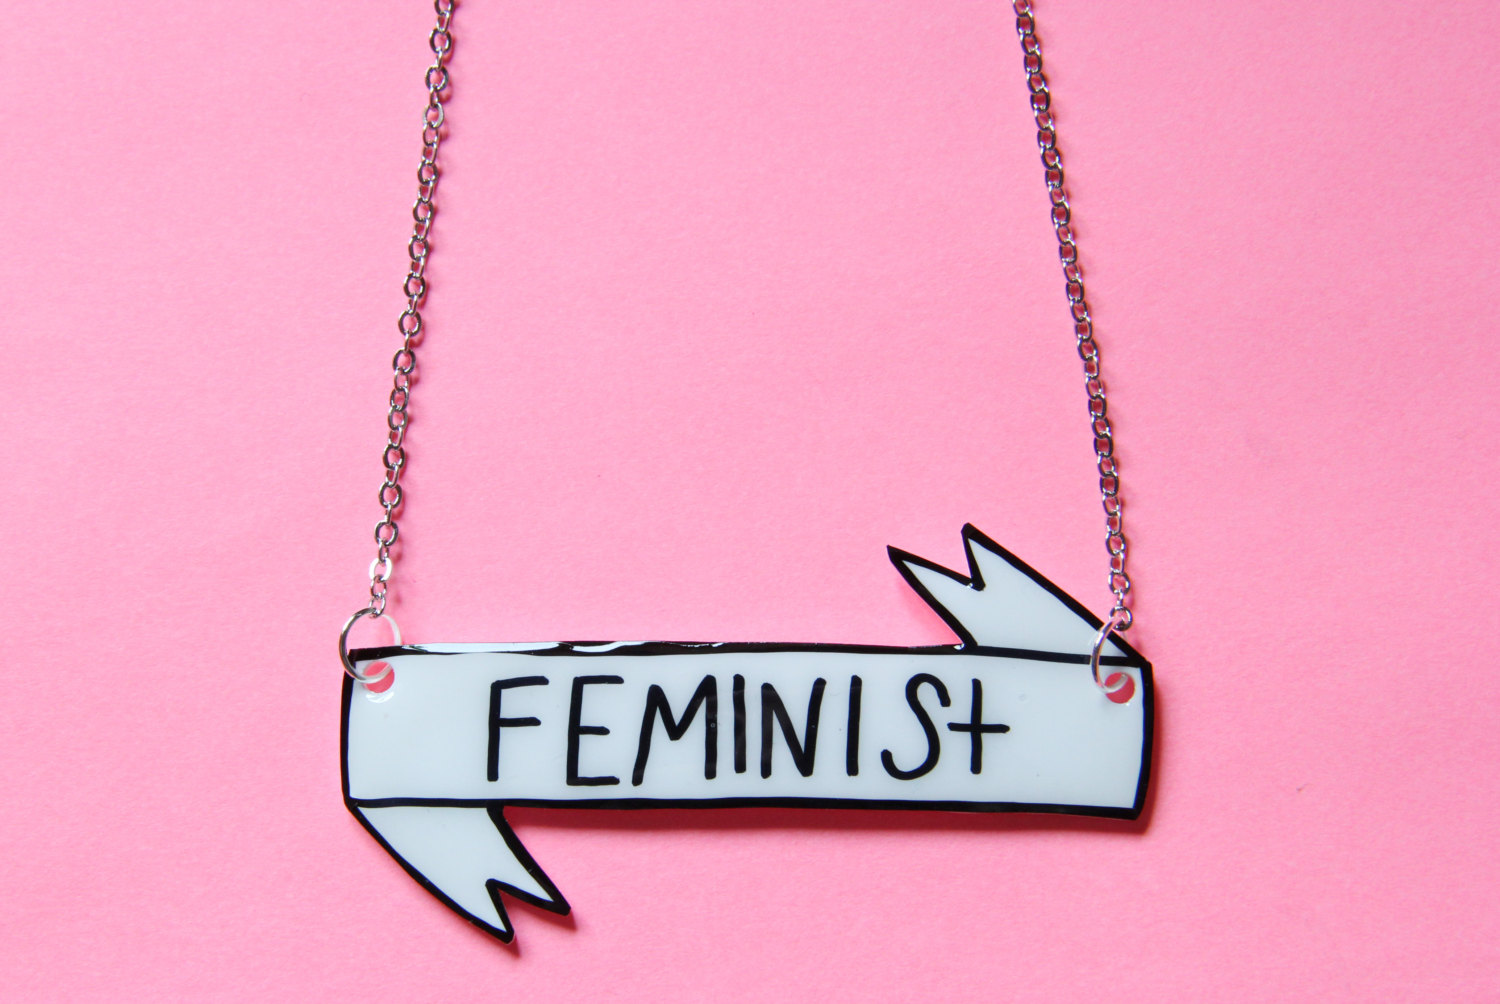 13 Feminist Decor Ideas You Need In Your Home (And Life) Right Now ...